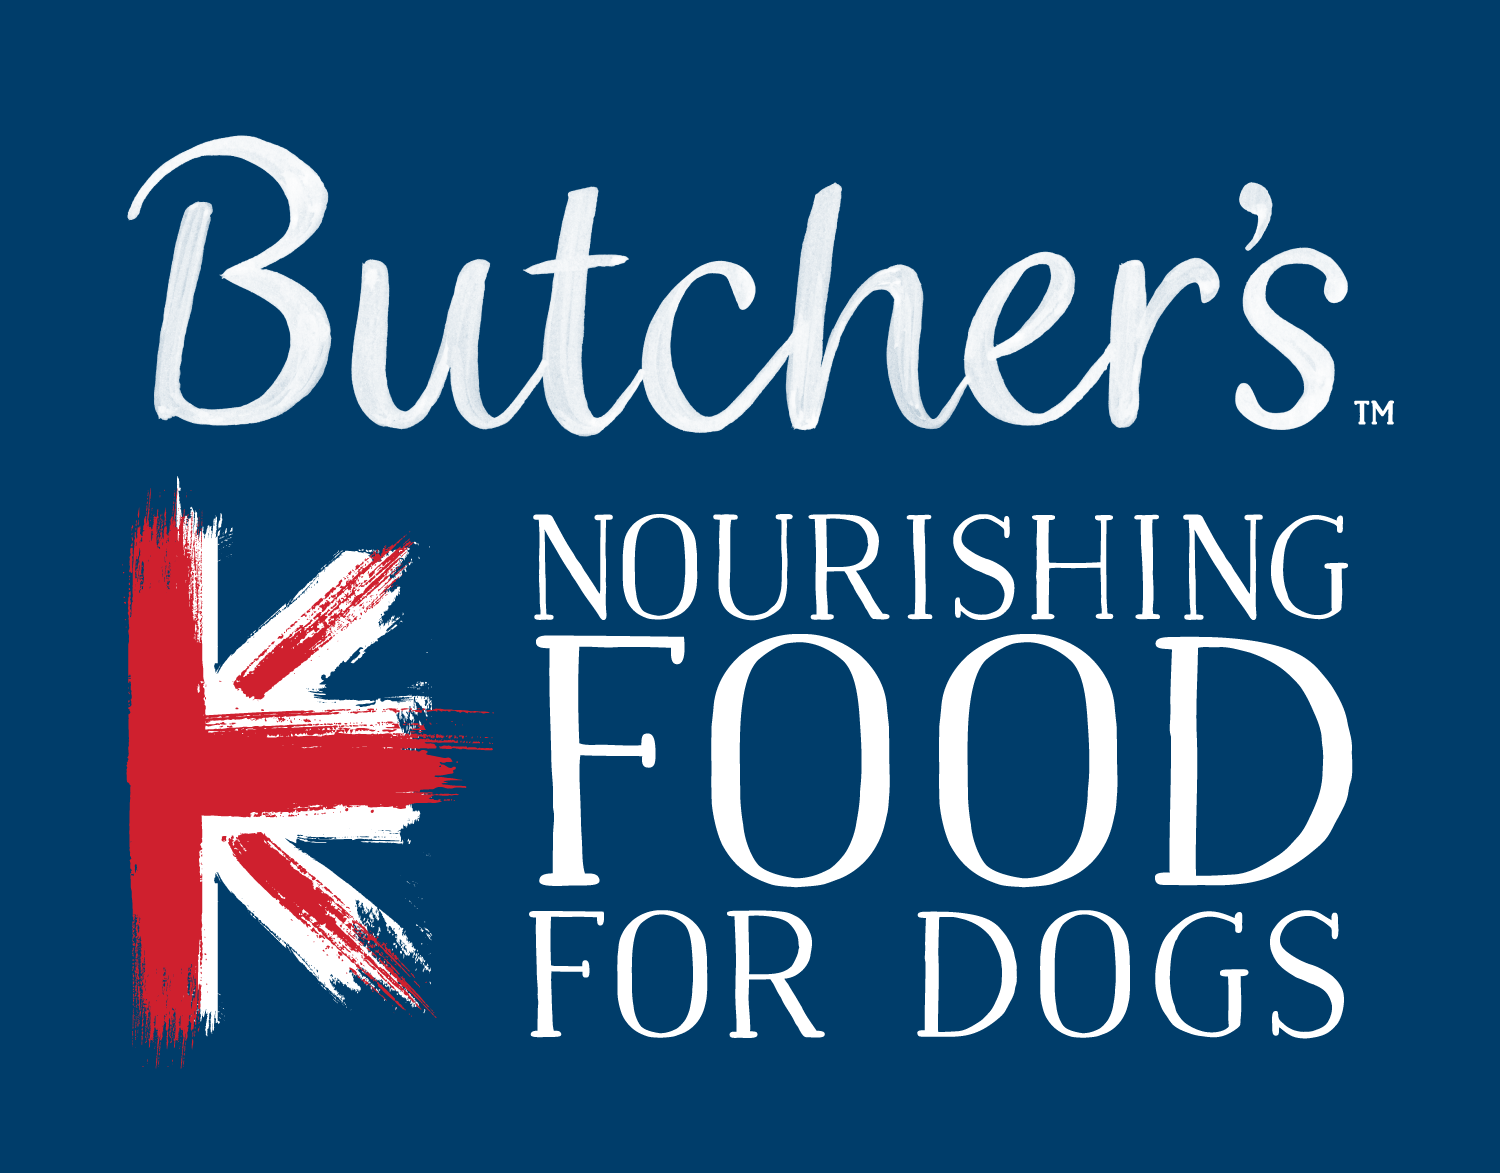 Butcher's Nourishing Food for Dogs